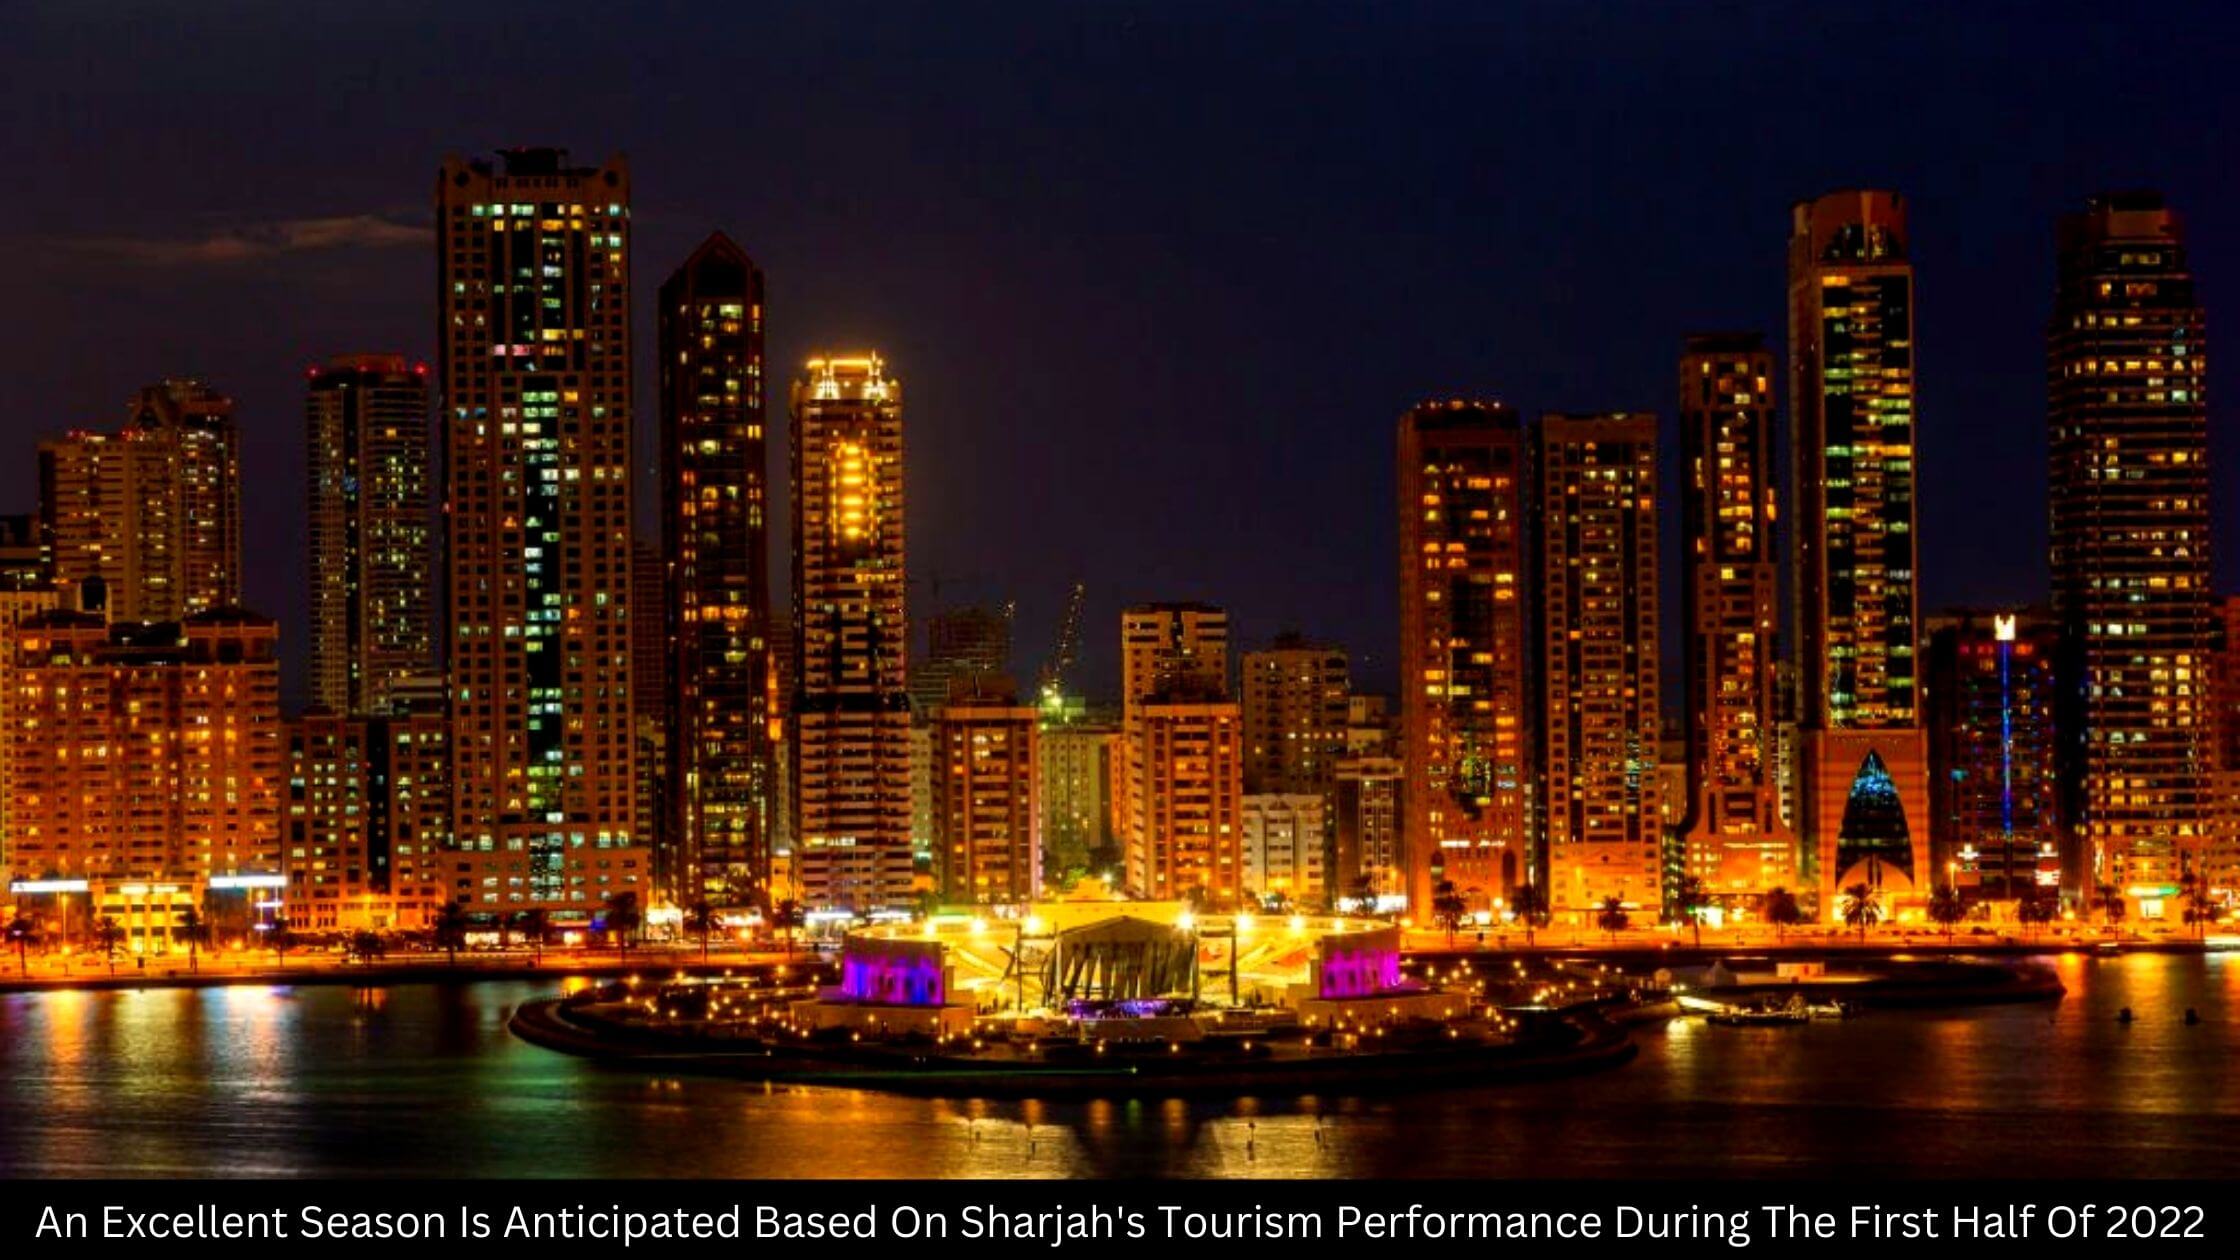 An Excellent Season Is Anticipated Based On Sharjah's Tourism Performance During The First Half Of 2022